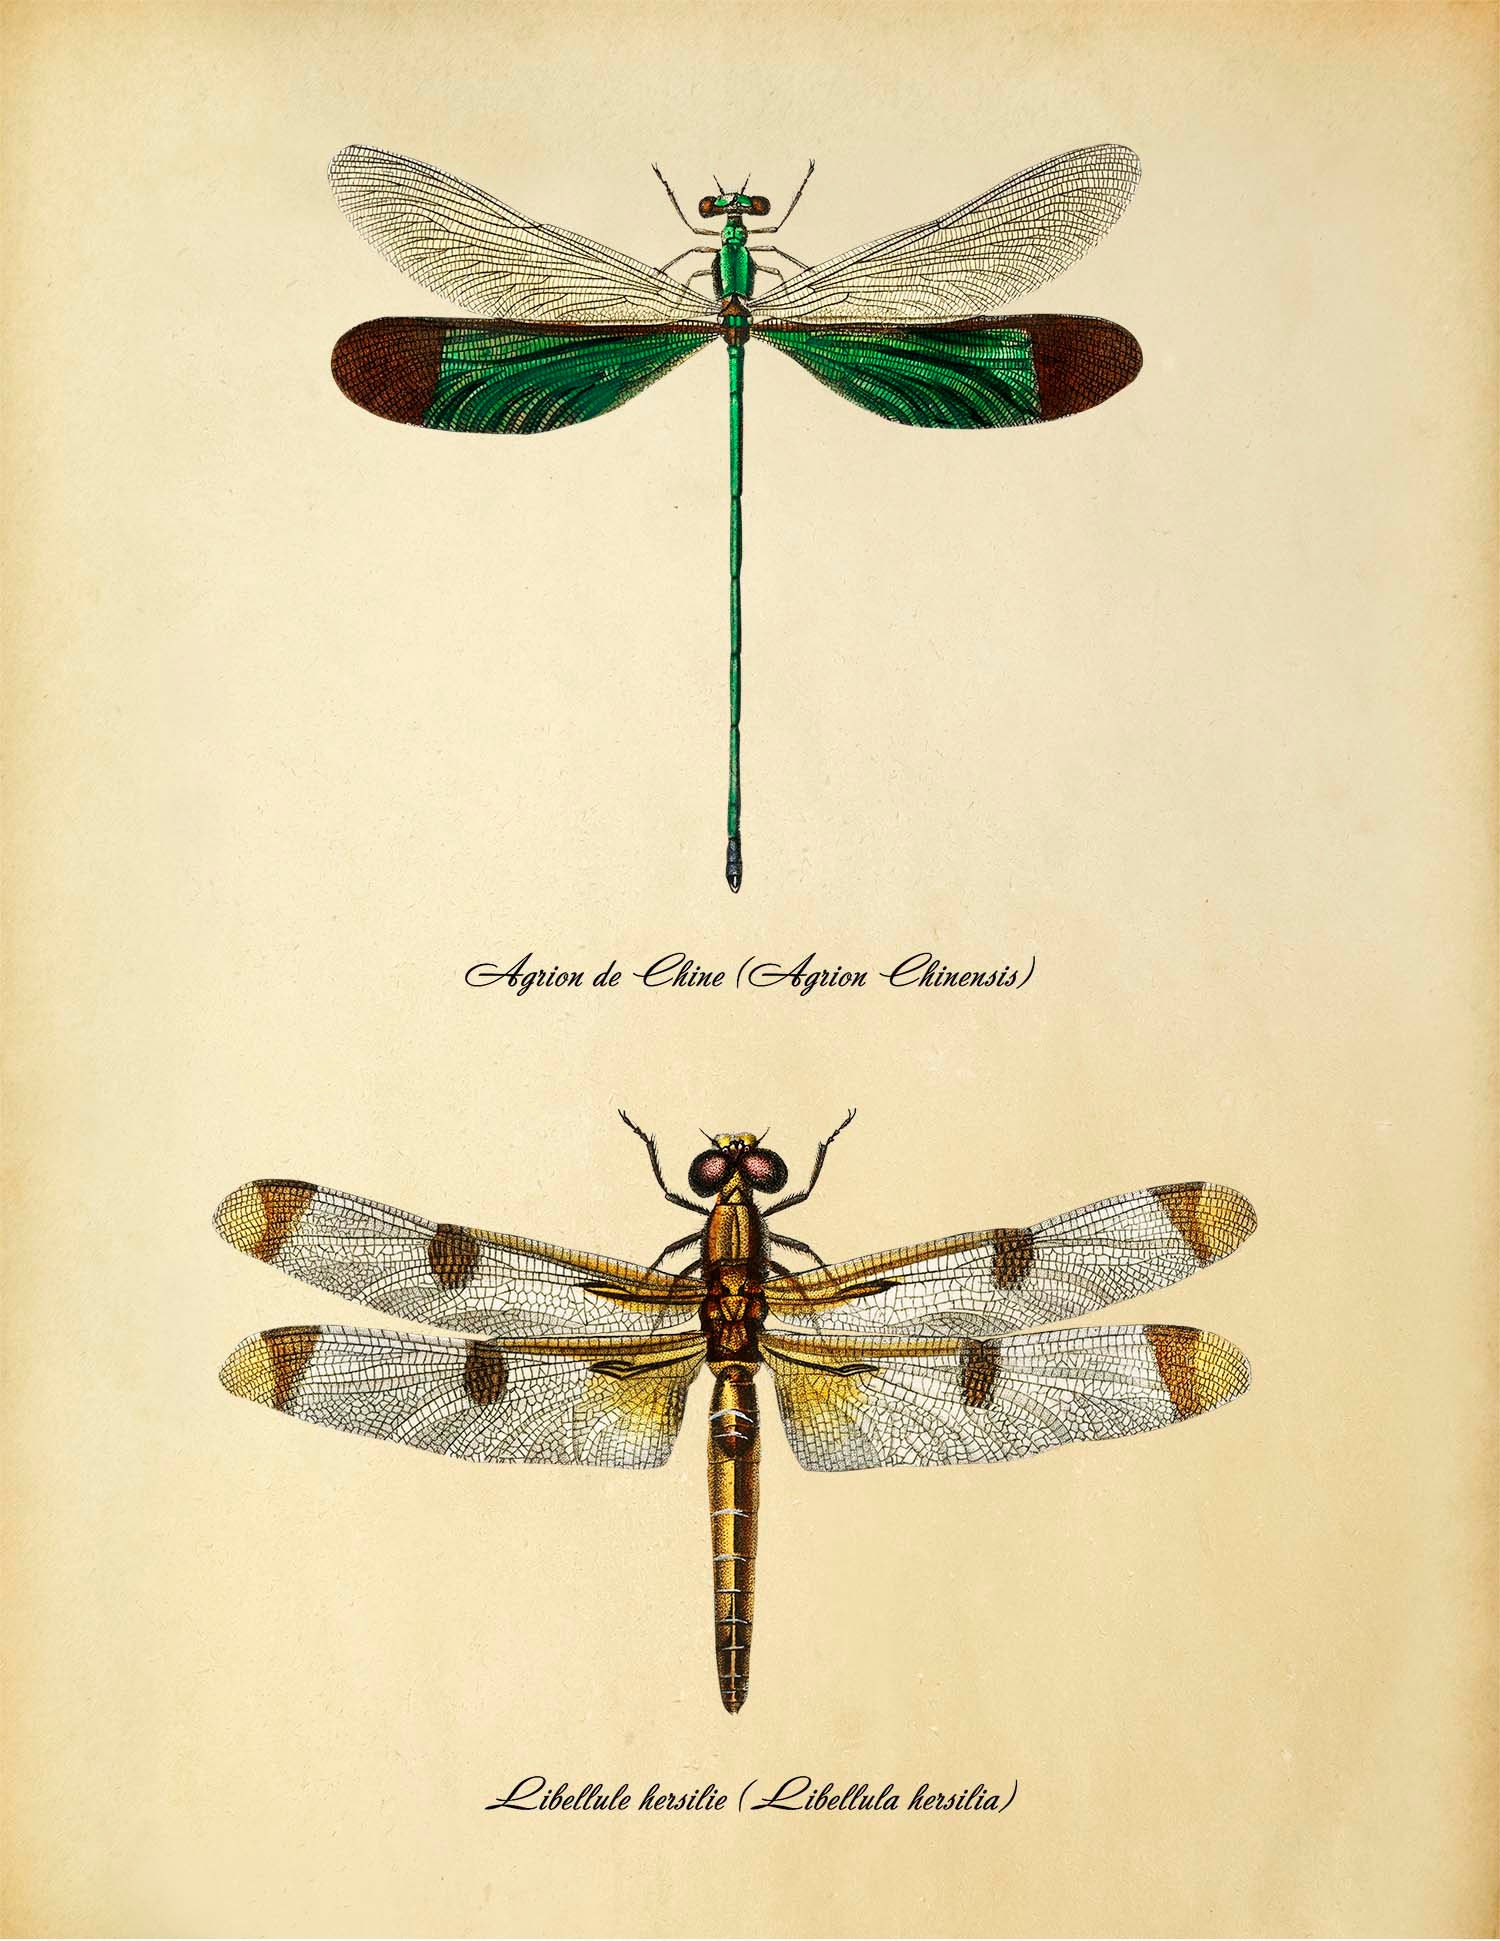 Dragonfly Art Print Dragonf Art Printable Vintage Insects Etsy